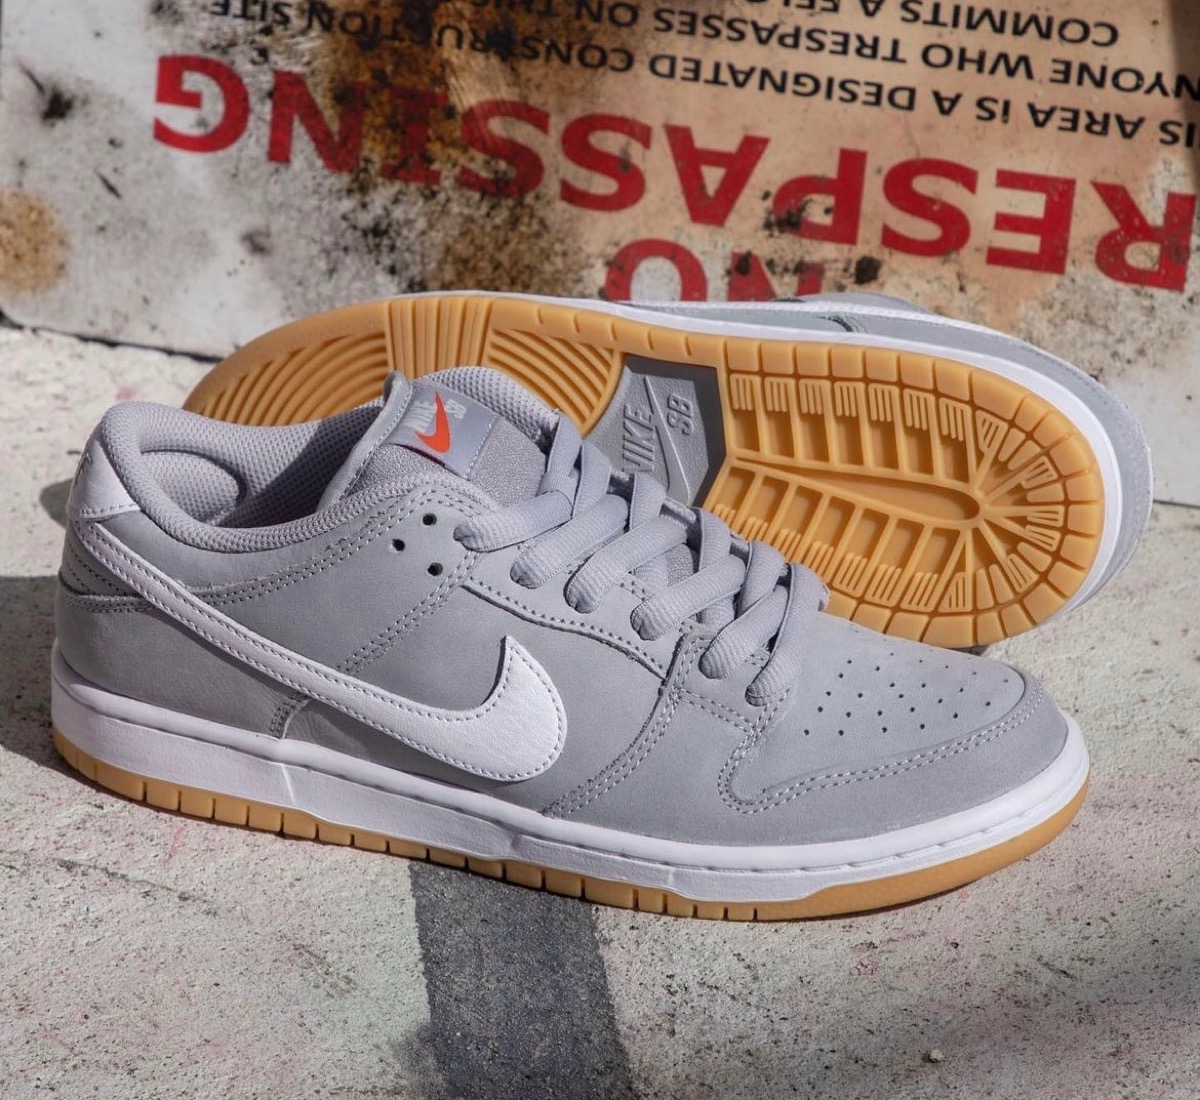 Nike SB Dunk Low Pro ISO “Wolf Grey Gum”が国内5月12日に再販